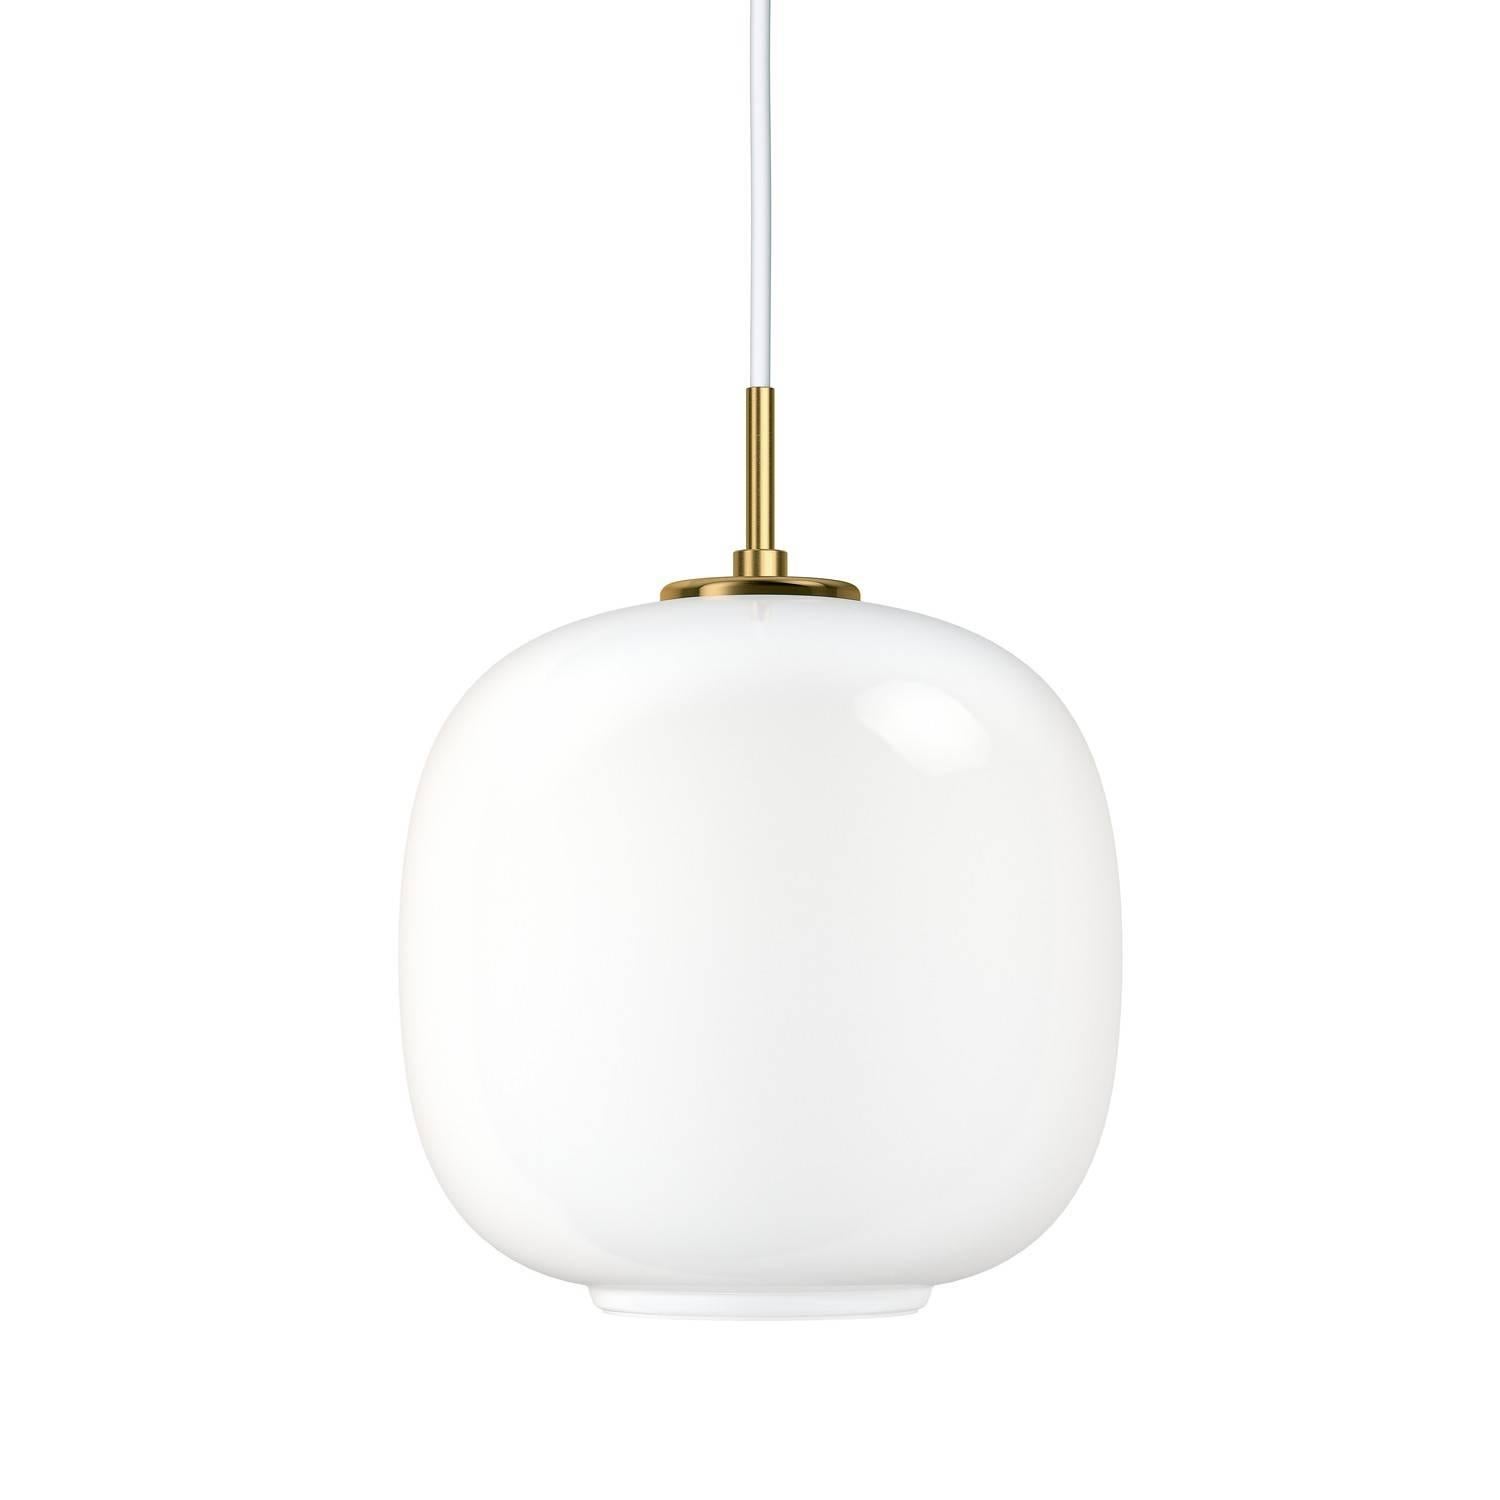 Vilhelm Lauritzen VL45 'Radiohus' pendants for Louis Poulsen. Executed in hand blown glossy white opal glass, brushed brass pendant tube, white metal canopy and white cord. This listing is for the smaller sized pendant. Also available in larger 17.6